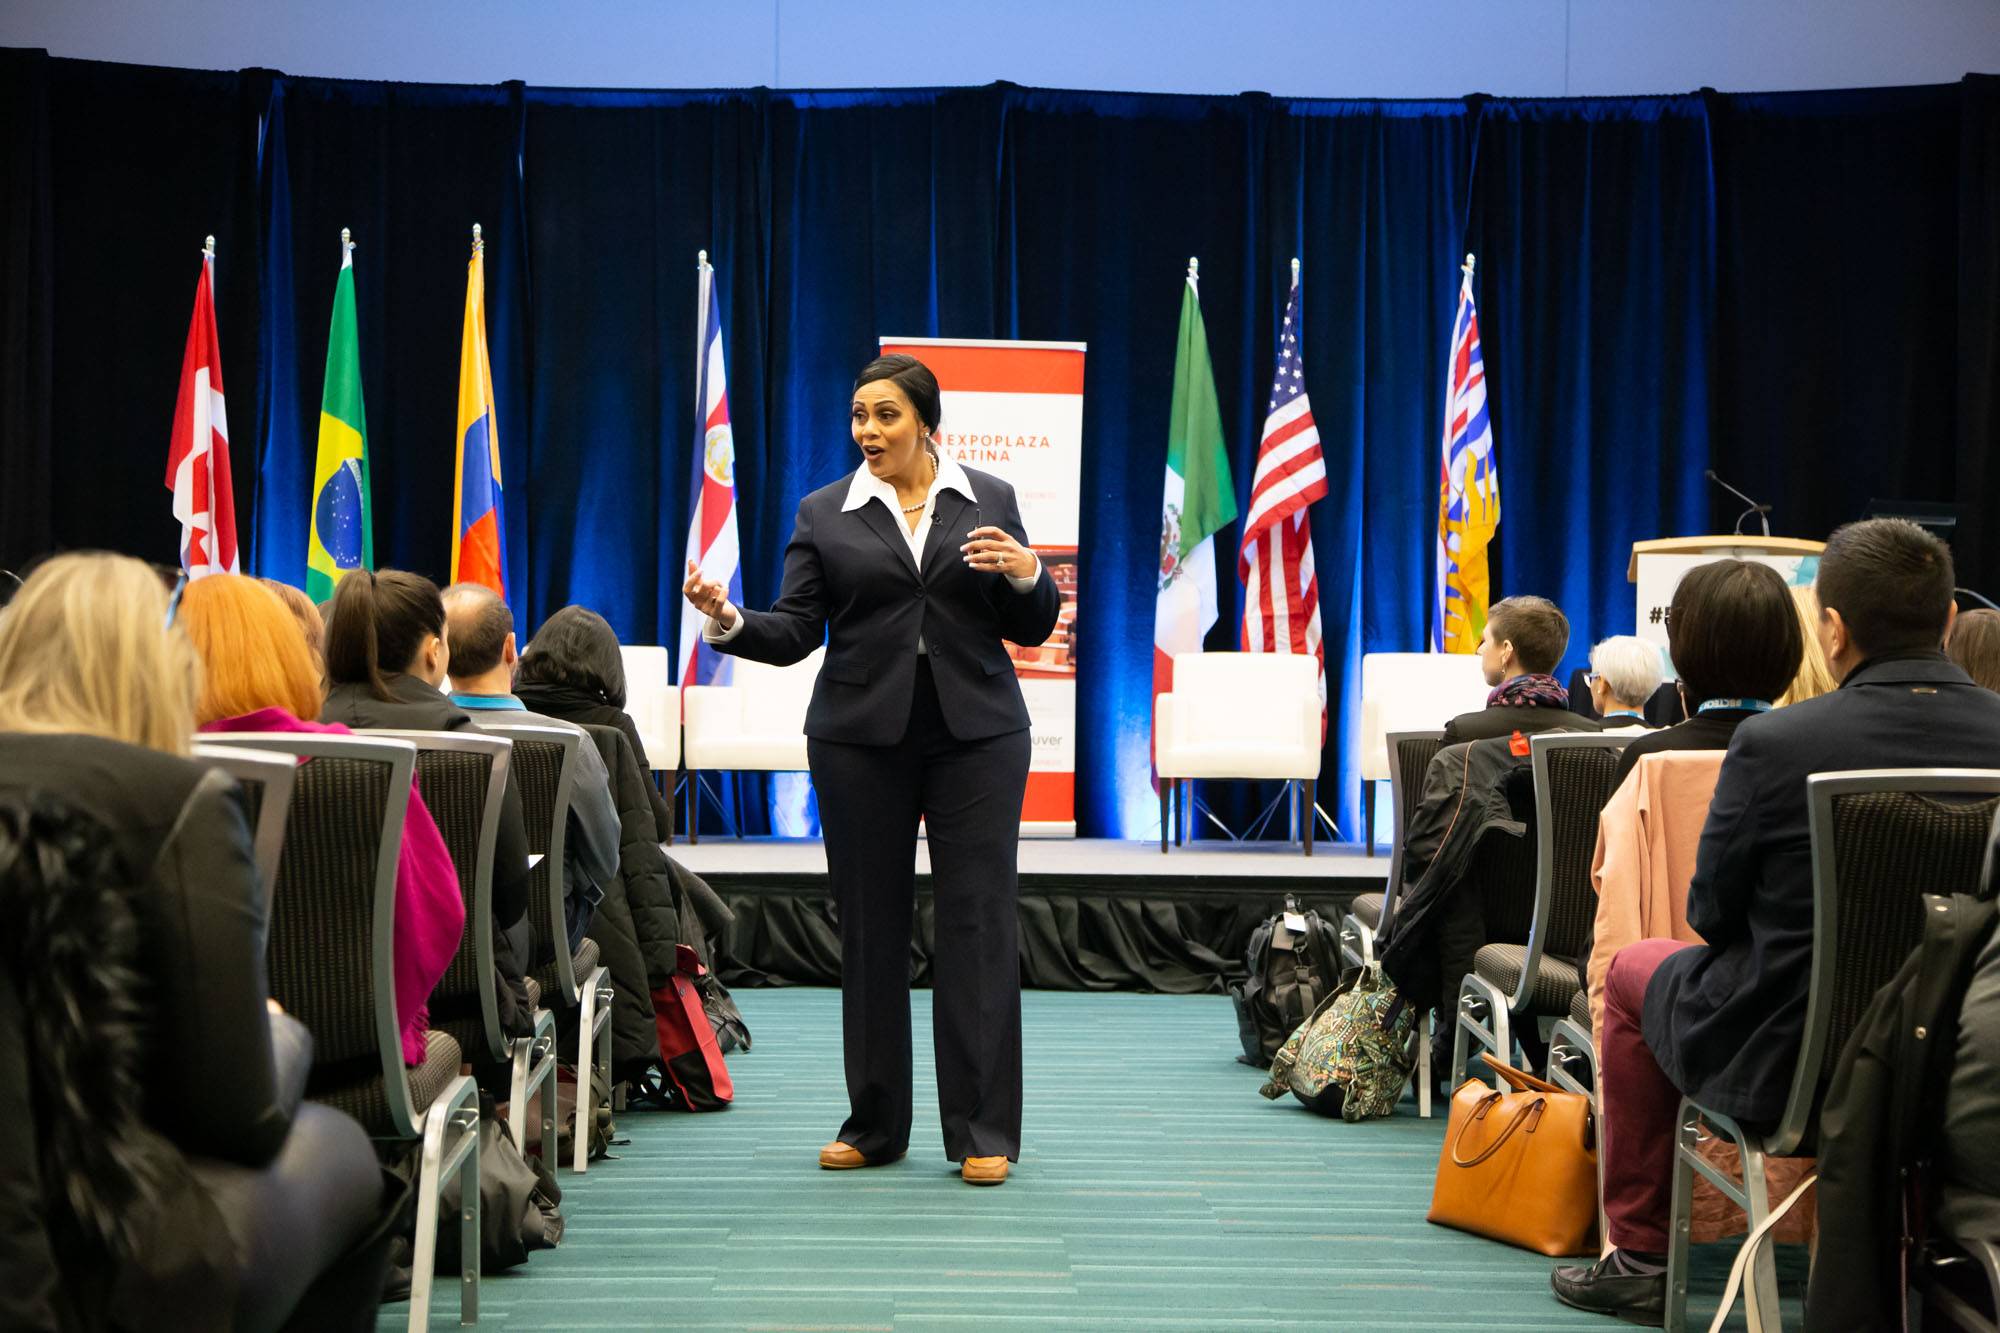 BC Tech Summit 2019 Day One, Vancouver Convention Centre, Mar 11 2019. Kirk Chantraine photo.